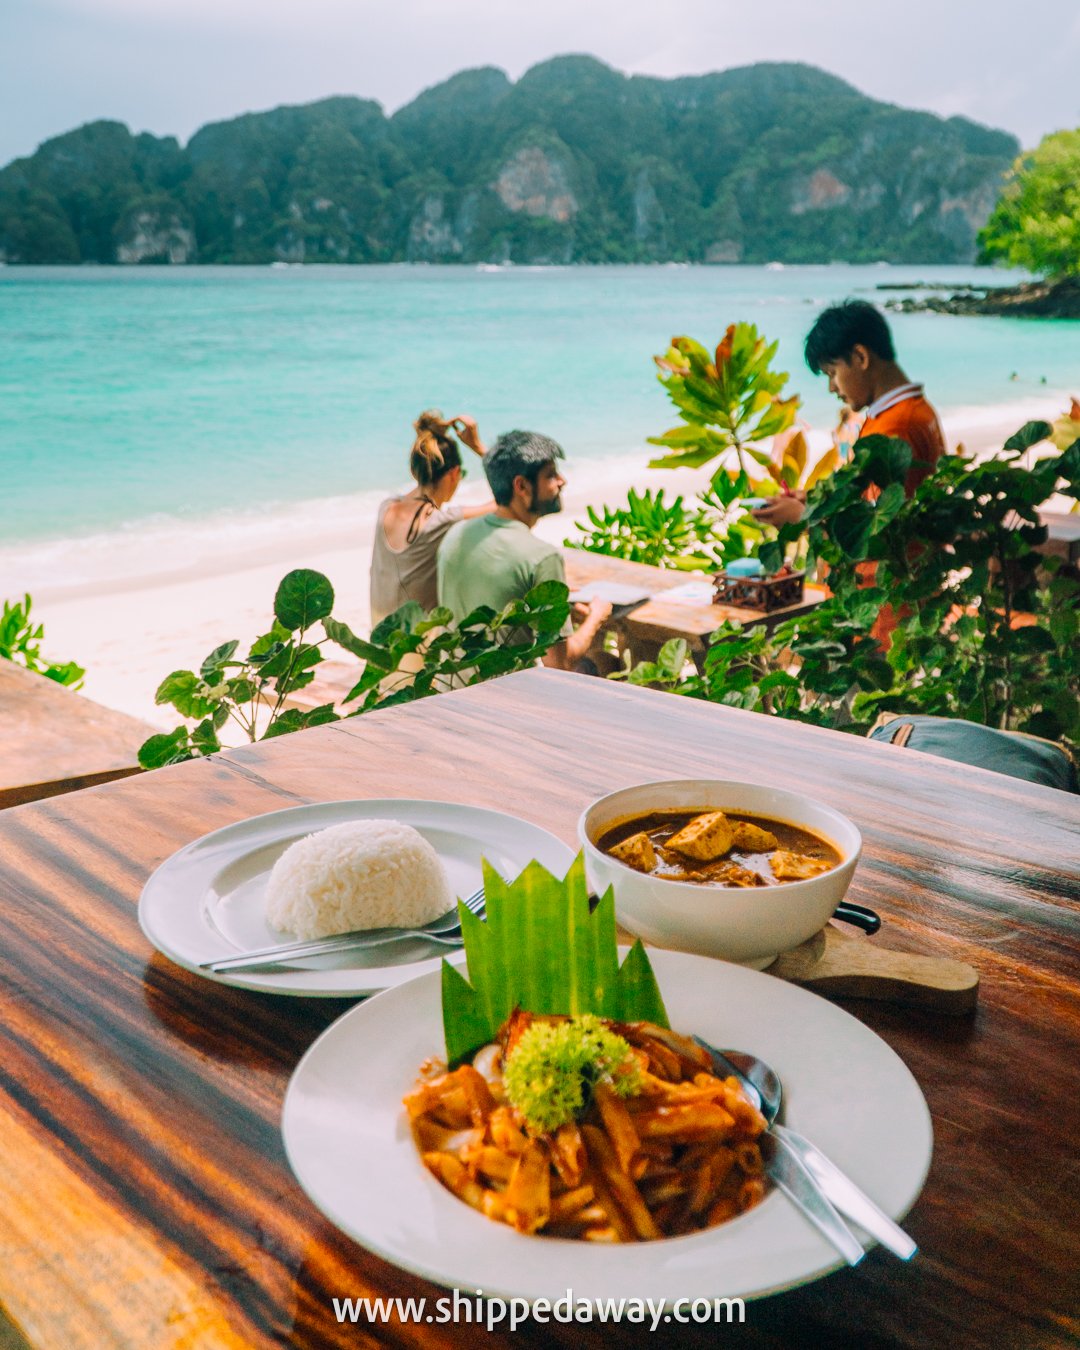 Tasty food next to the beach in Phi Phi Islands